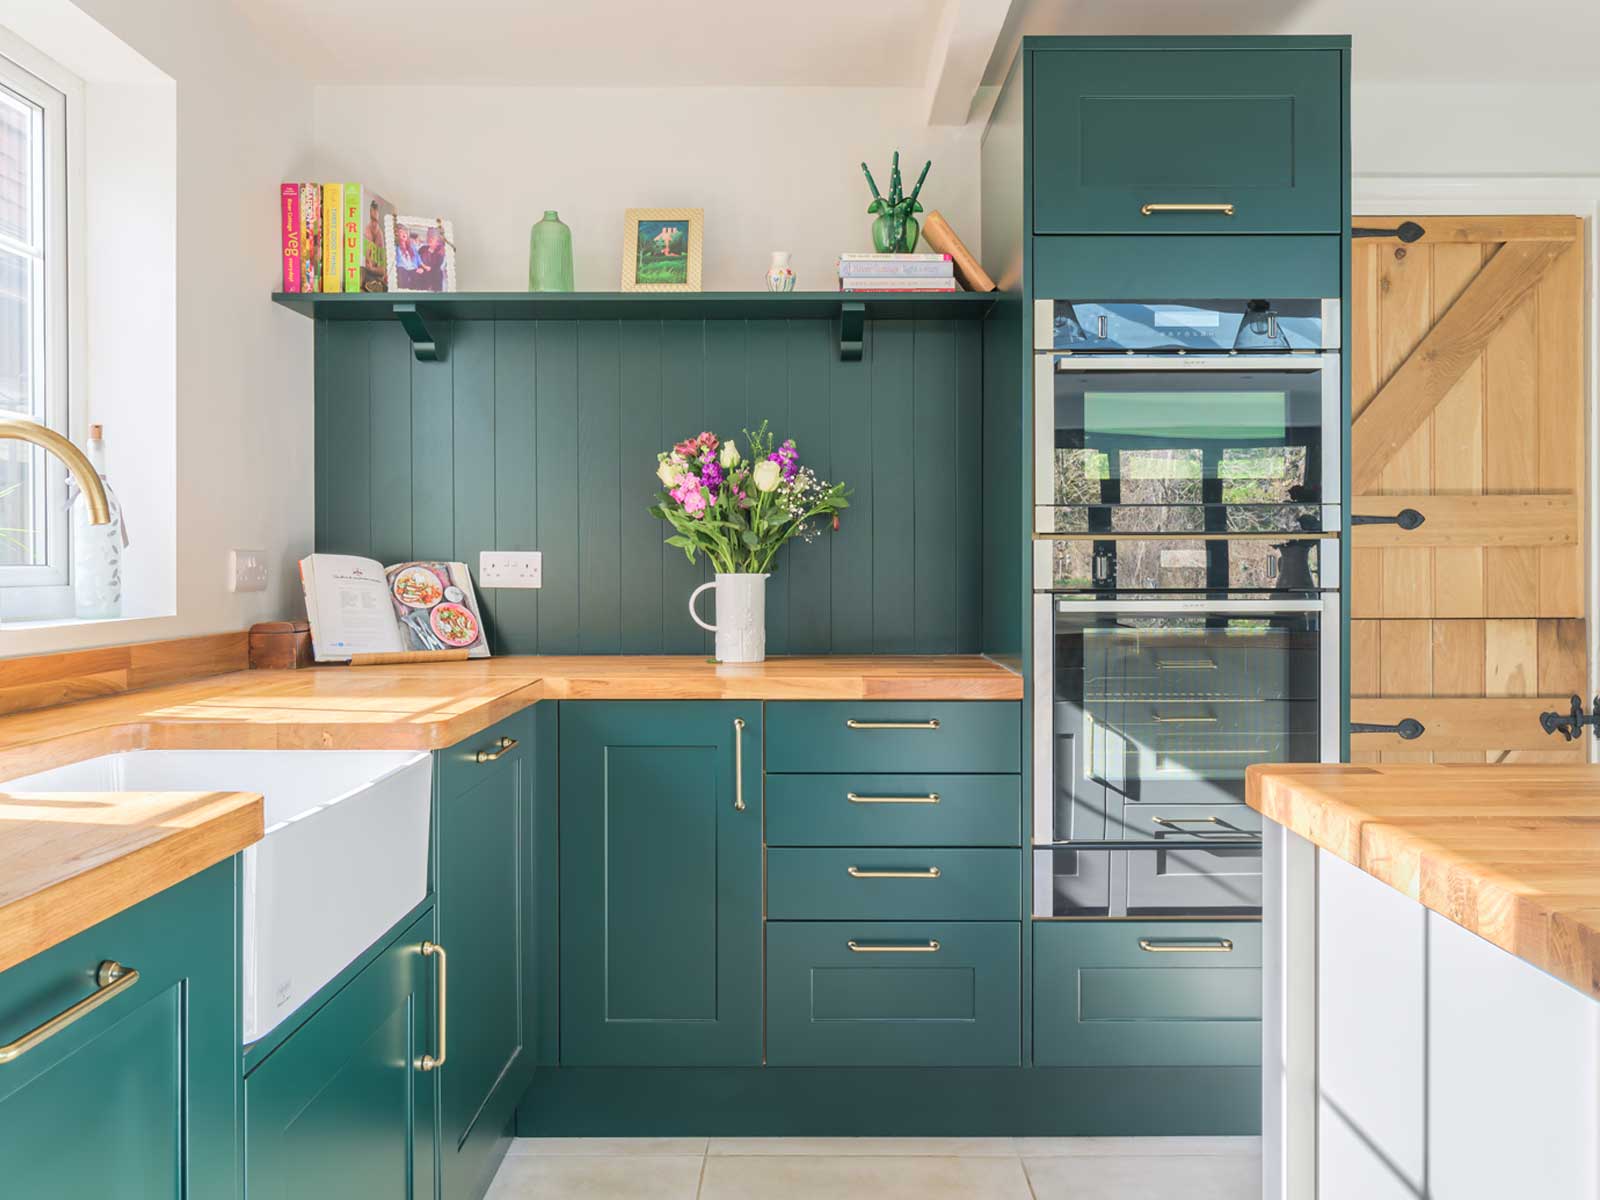 A kitschy kitchen with eclectic kitchen décor and green kitchen paint